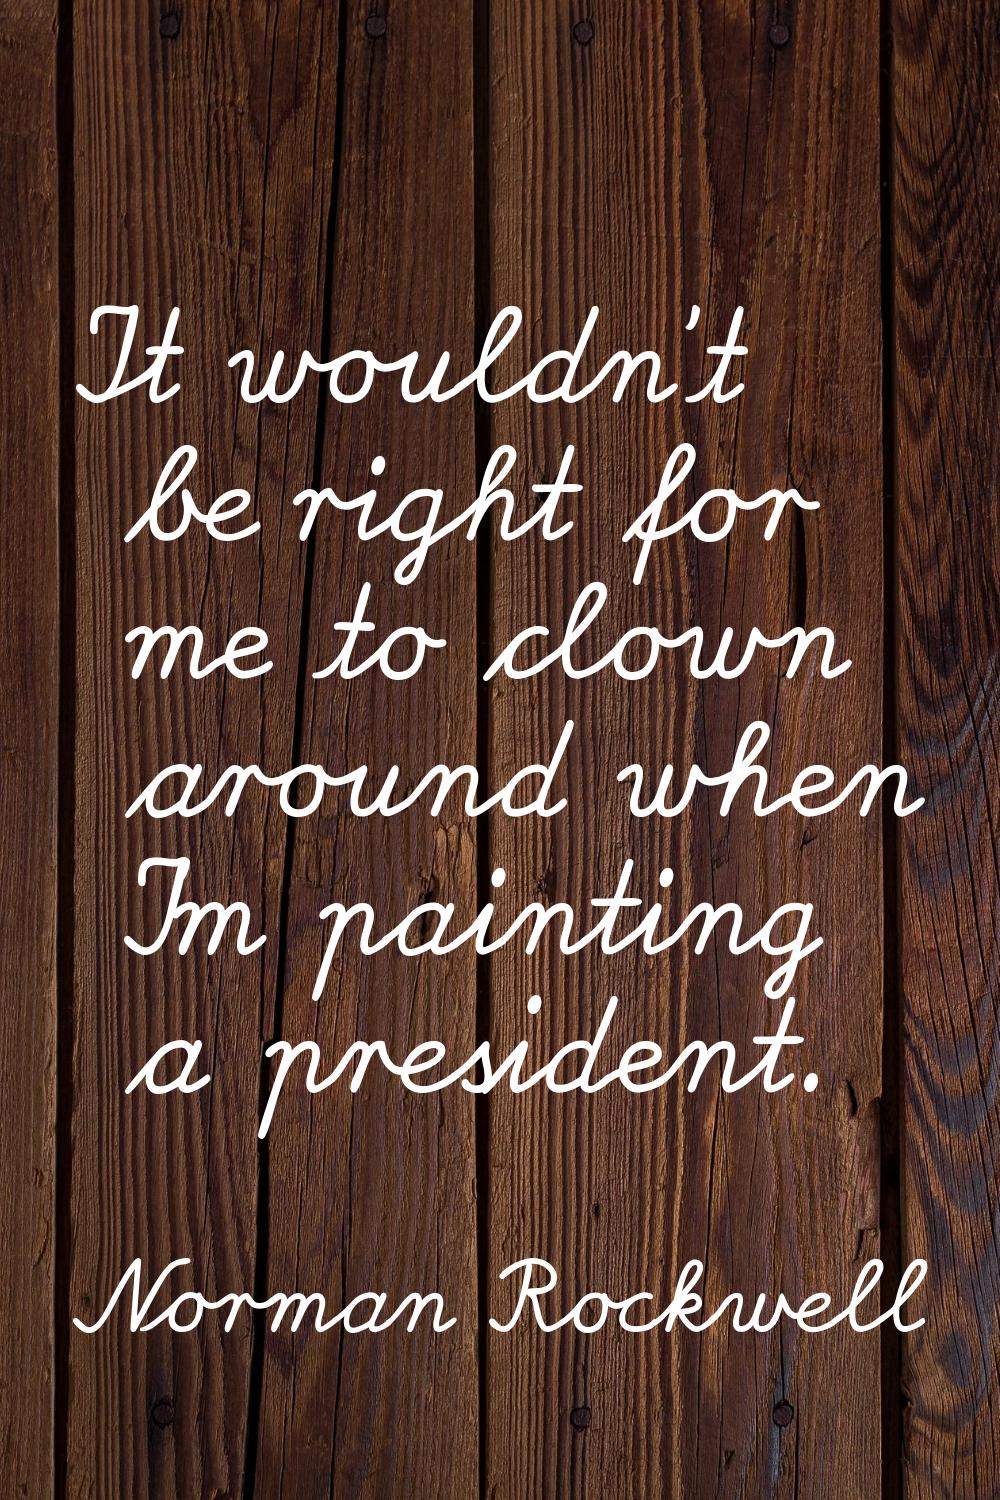 It wouldn't be right for me to clown around when I'm painting a president.